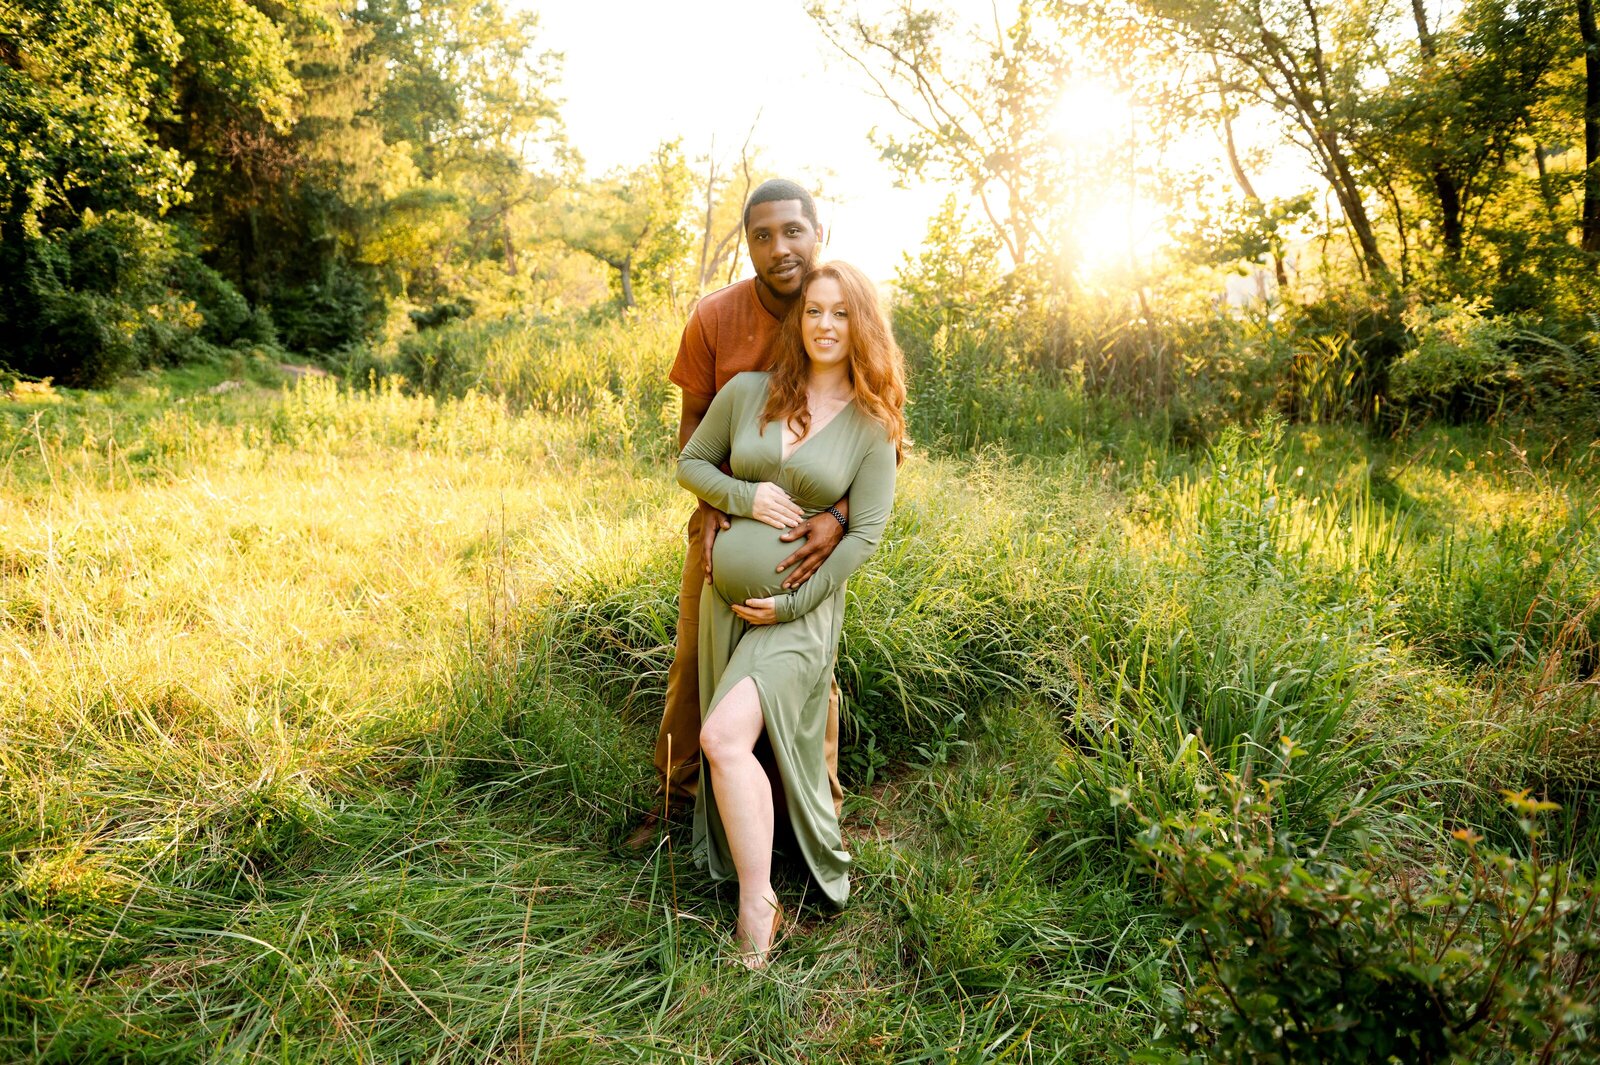 husband and pregnant wife in grass field